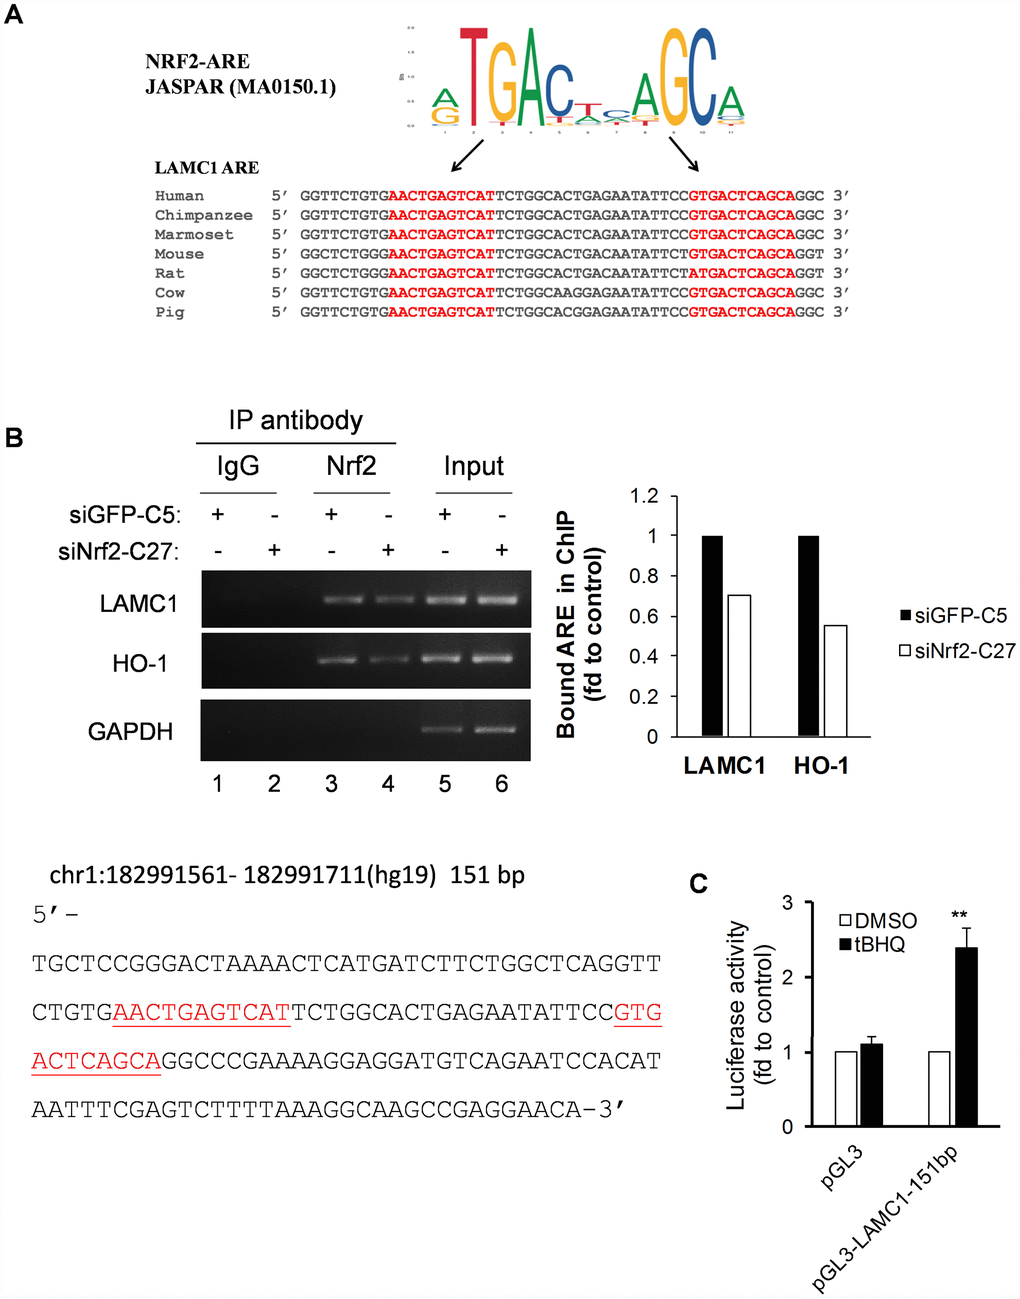 Conservative ARE analysis and luciferase reporter analysis of the LAMC1 gene. (A) Comparative transcription factor binding site analysis of the LAMC1 gene across different mammalian species shows highly-conserved NRF2 AREs. (B) Left, siNRF2-C27 and siGFP-C5 cells subjected to ChIP analysis with anti-Nrf2. Right, the relative ability of NRF2 to bind to the ARE site (value of NRF2 in siGFP-C5 cells set at 1; PCR reactions were not saturated; results are from at least 3 separate experiments; HO-1 served as positive control; GAPDH served as negative control). (C) tBHQ increased 151-bp LAMC1 promoter (sequence at left; red indicates ARE sequences)–luciferase activity in MCF7 cells. The plasmid pGL3-LAMC1-151bp was transfected into MCF7 cells in combination with pRL-TK for 24 h. Dual luciferase activity was measured after treatment with tBHQ (20 μM) for 6 h. Control, DMSO treatment for the same plasmid was set at 1 (mean ± SD, n=3; **p 